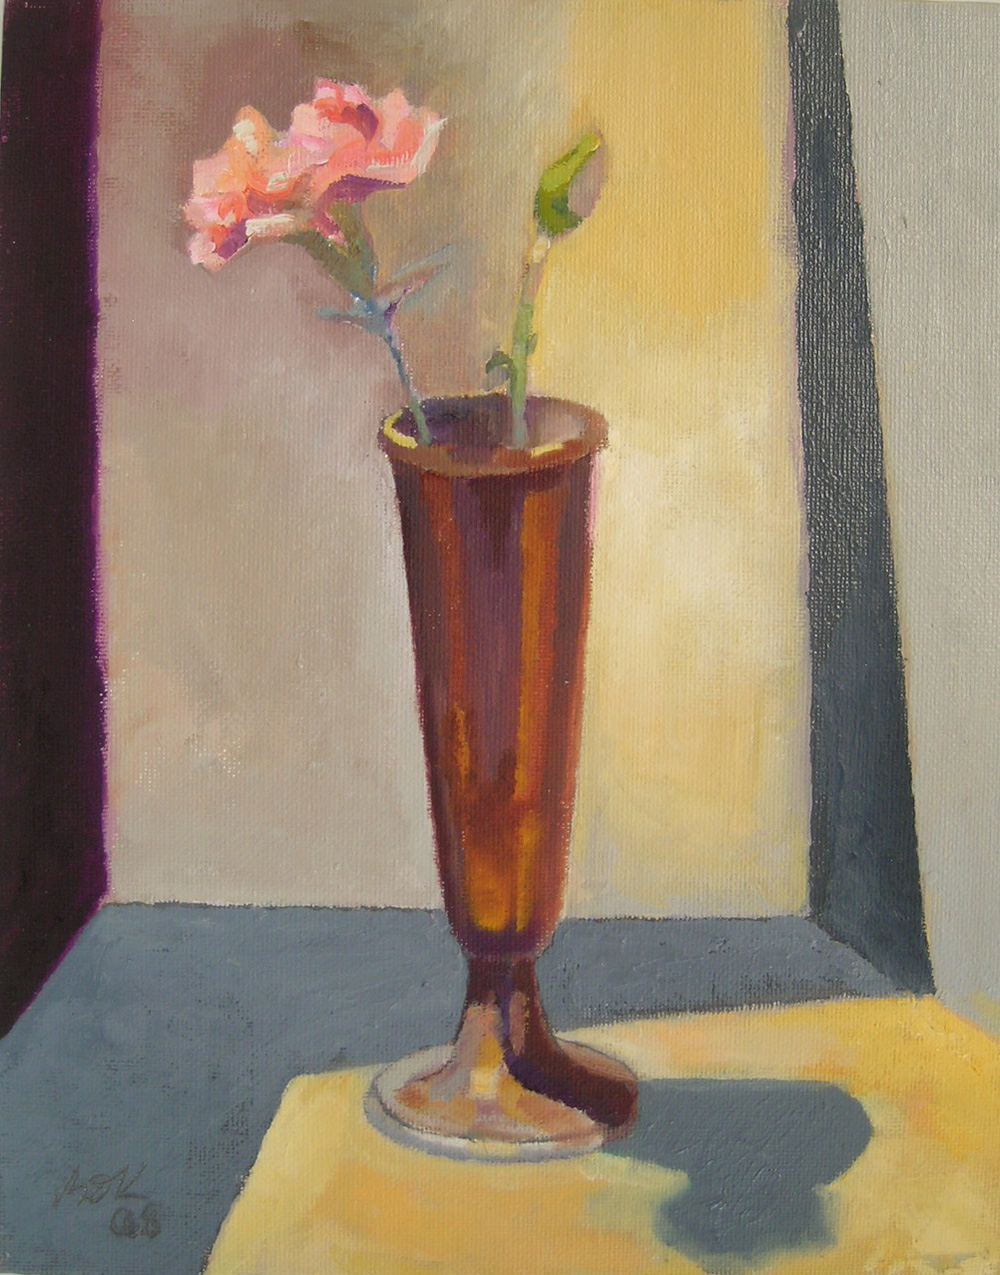 2008 Vase and Bud 25x 35 cm SOLD